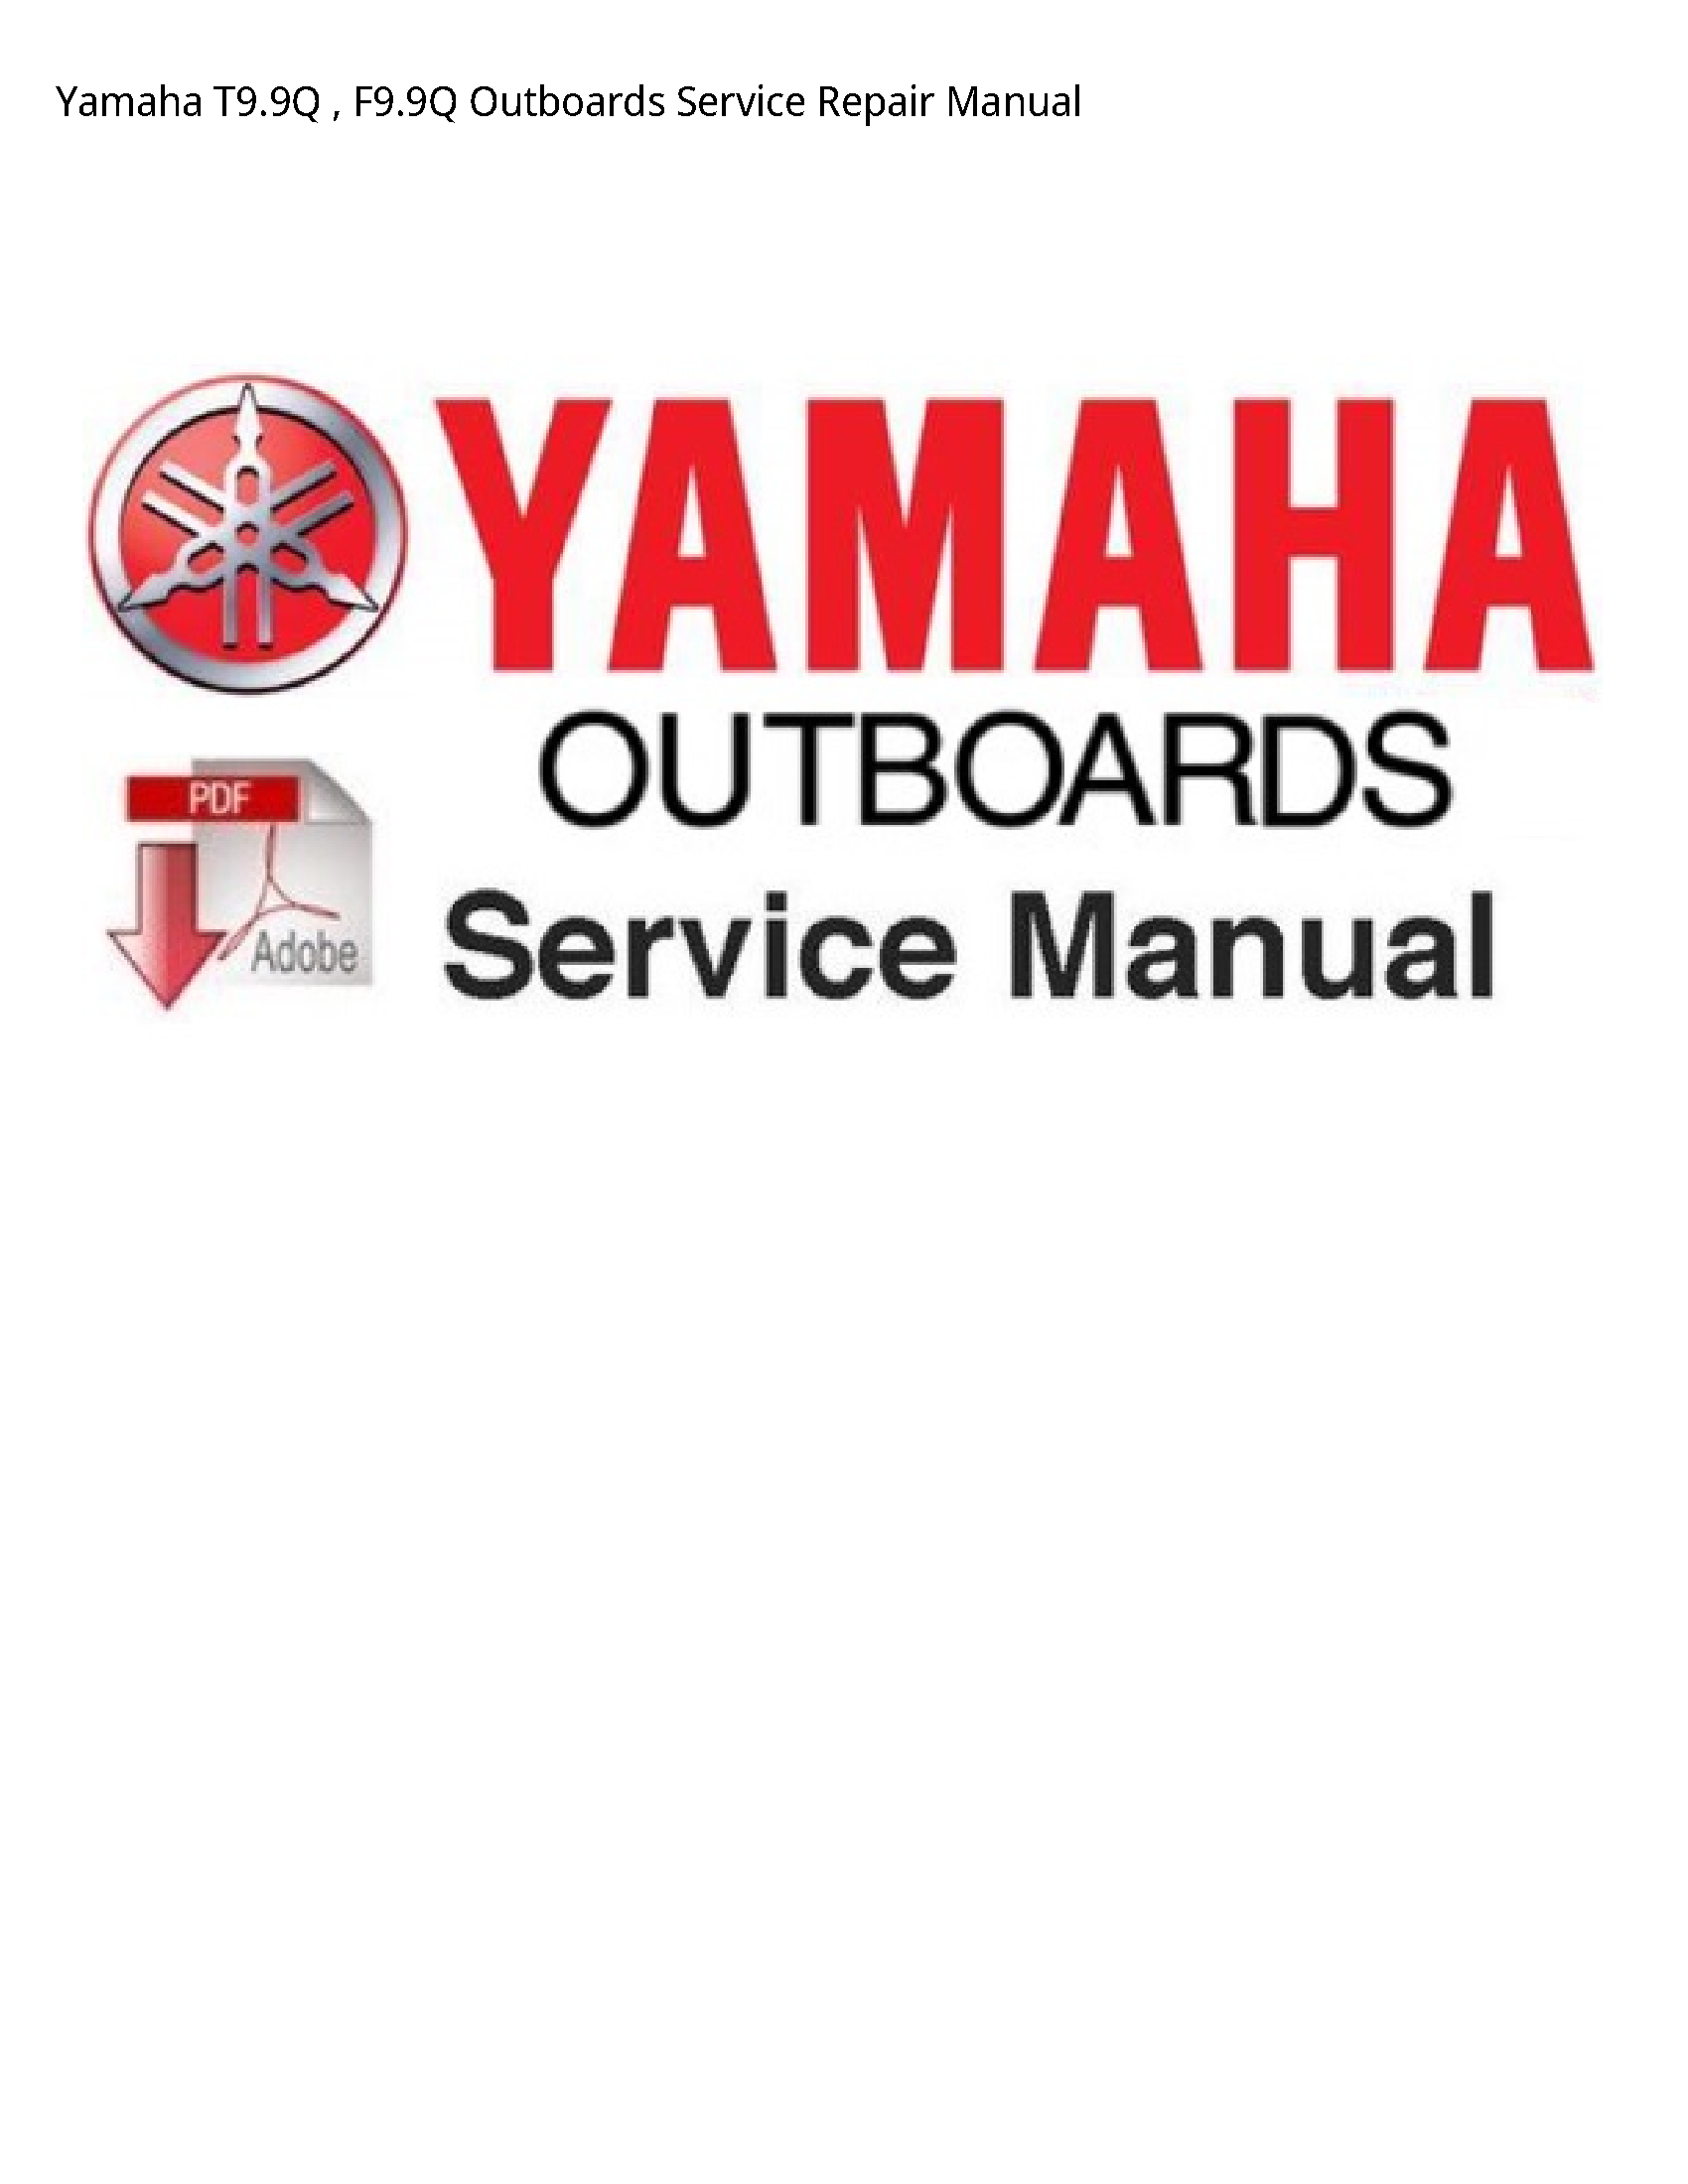 Yamaha T9.9Q Outboards manual